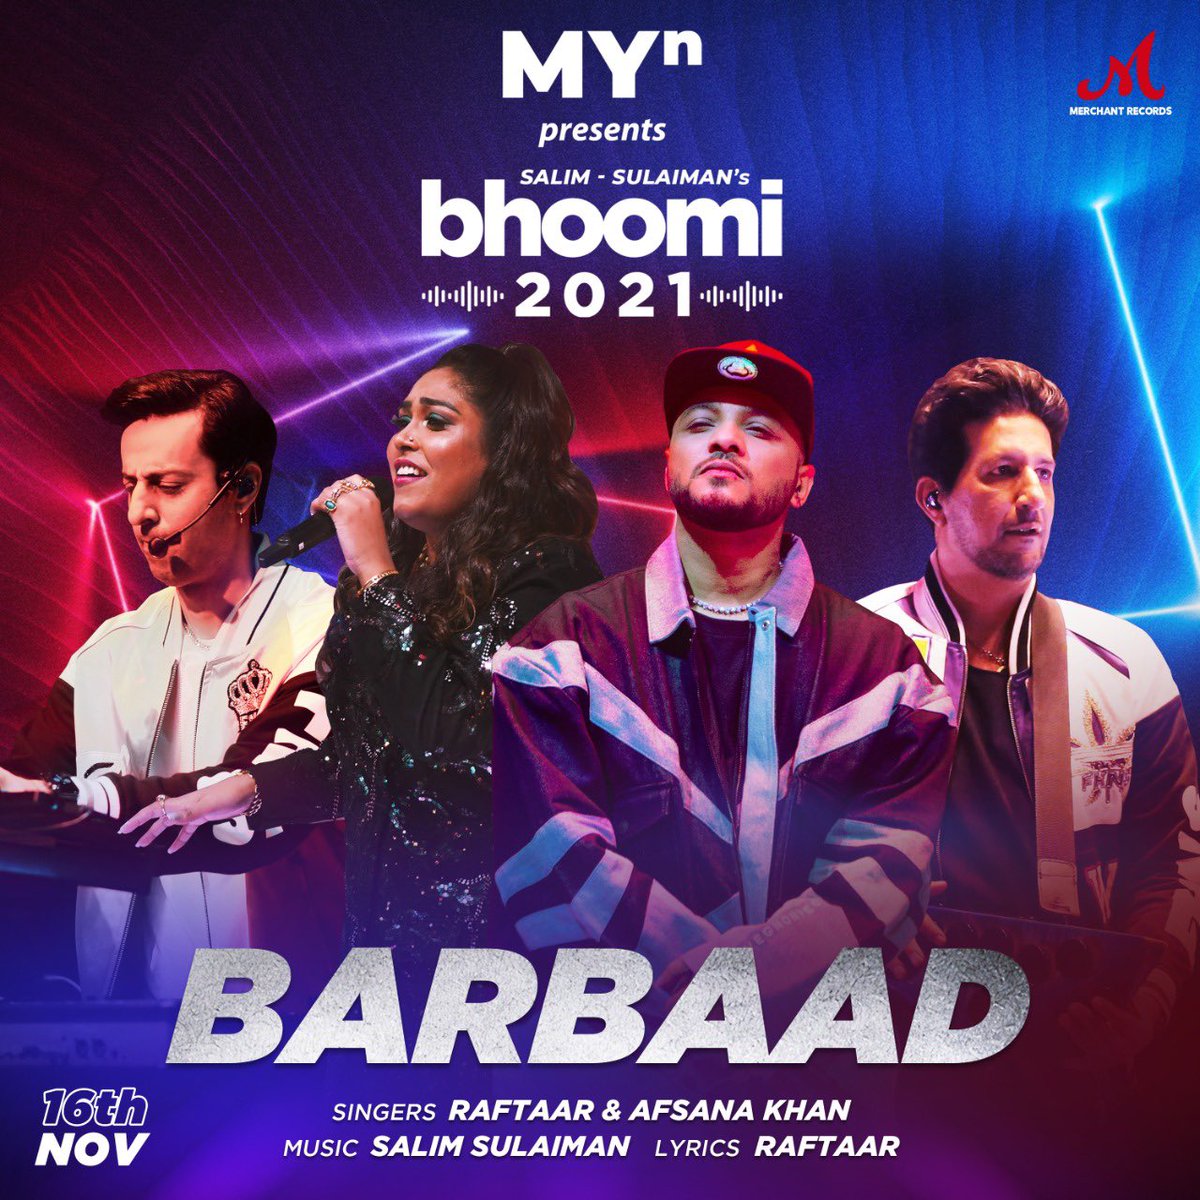 Sometimes, love destroys! Tune into Barbaad, the glorious anthem about toxic love by #MYnPresentsBhoomi2021 featuring @raftaarmusic and @AfsanaStar on MYn, India’s first super app. Download now from the link in bio.

#MYnPresentsBhoomi2021